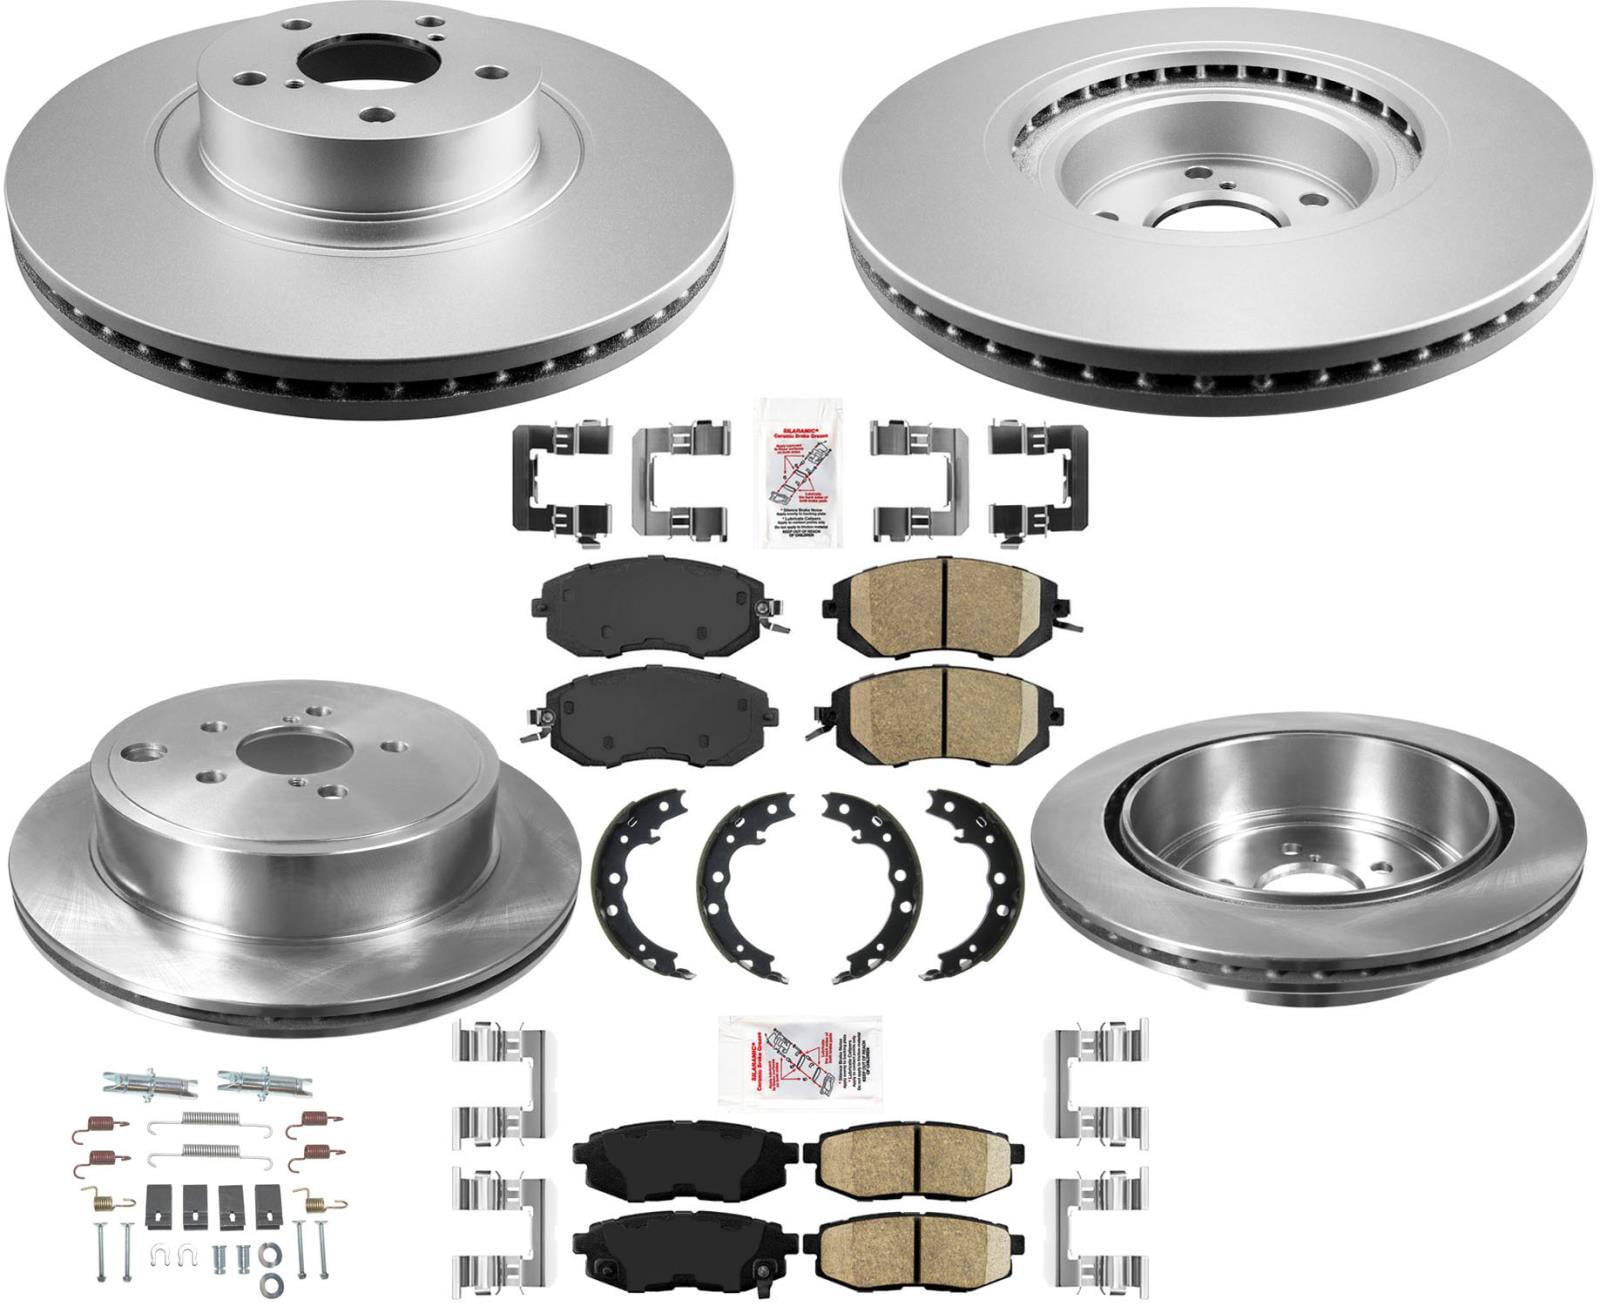 Transit Auto - Front Rear Coated Drilled Slotted Disc Brake Rotors And  Semi-Metallic Pads Kit For Chevrolet Equinox GMC Terrain Buick LaCrosse  KDF-100791 